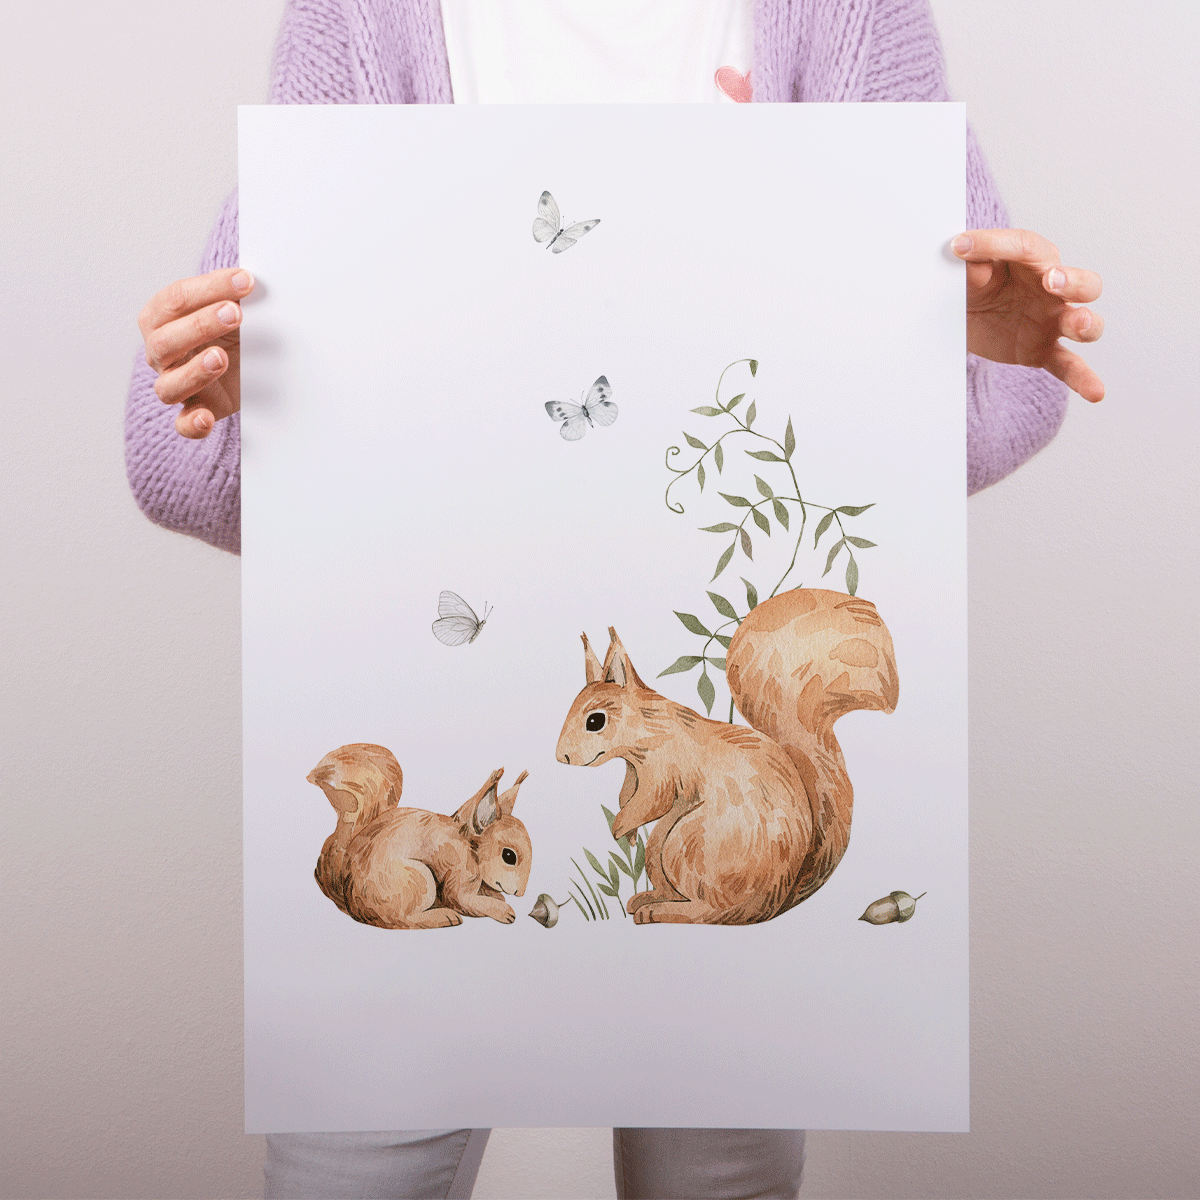 Woodland print - Magical forest - Squirrels